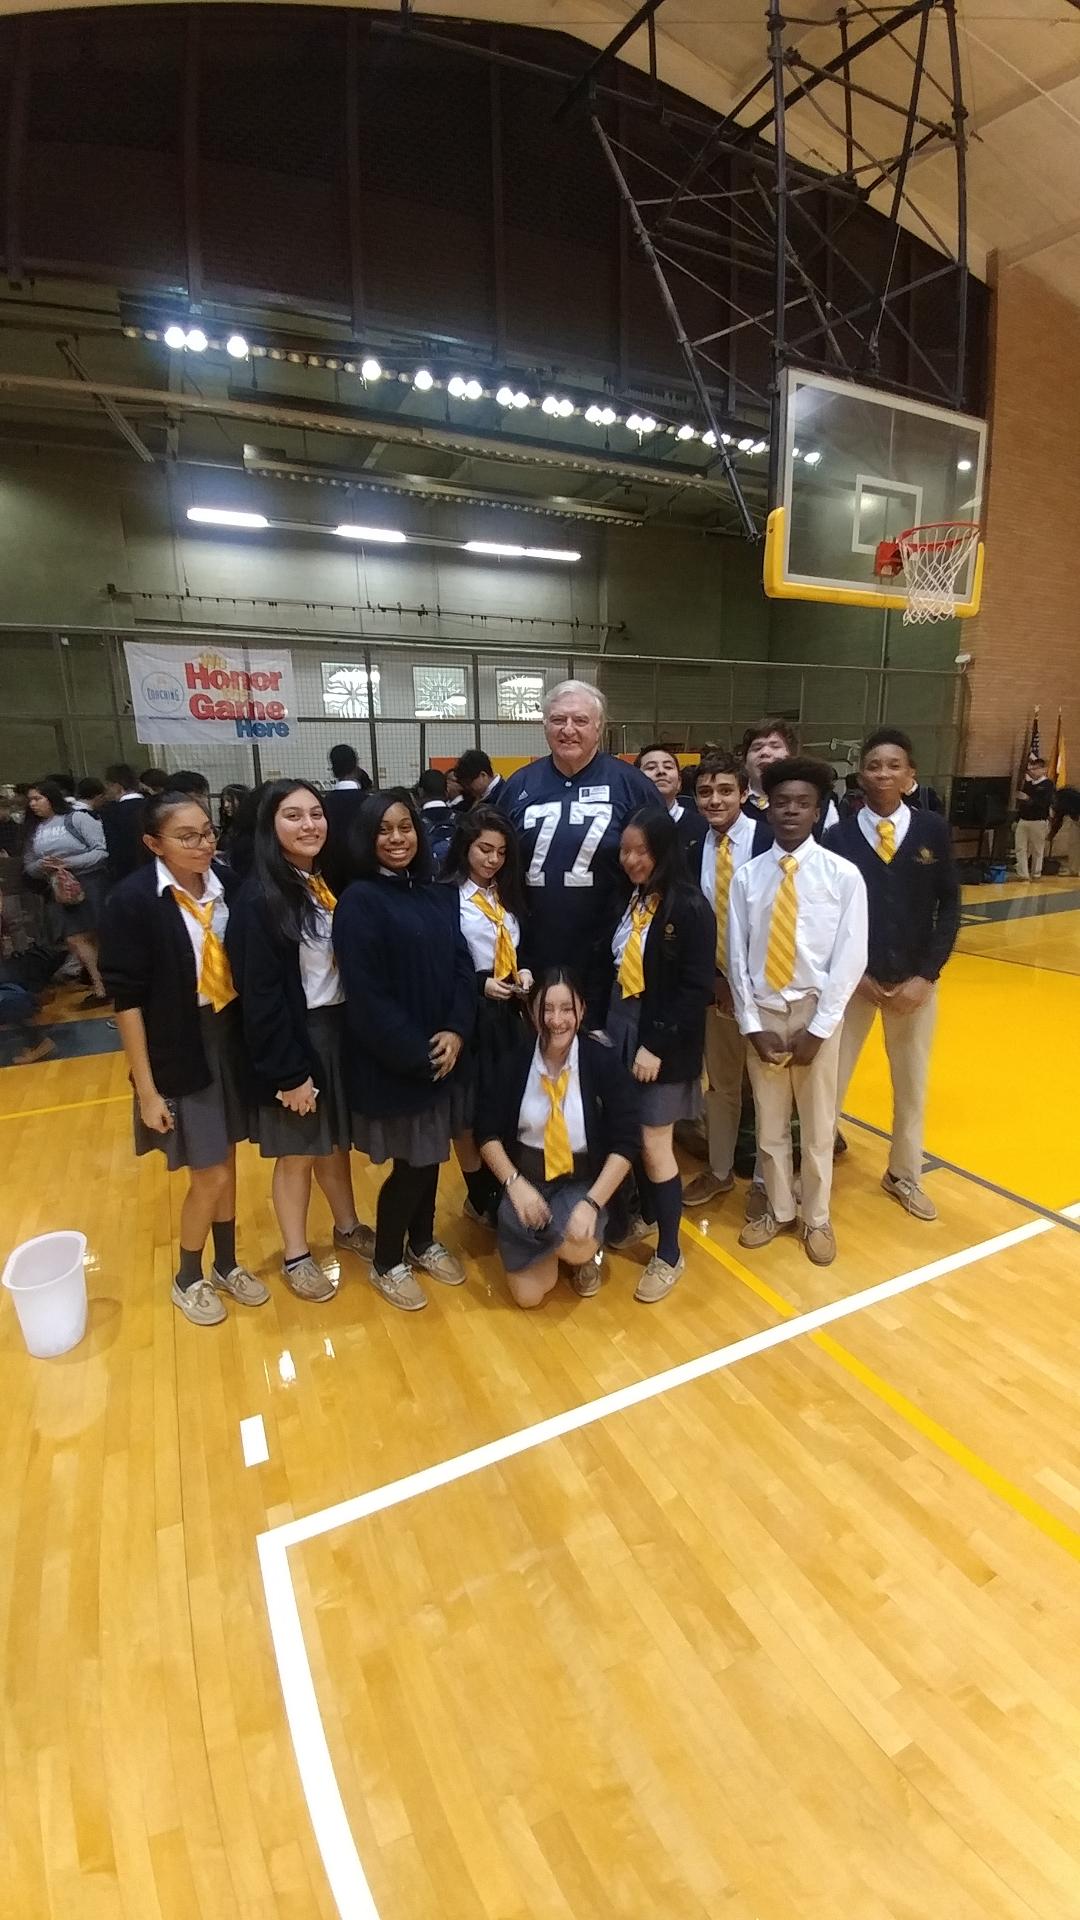 A group of young students gather around Mike McCoy after hearing his message. The young boys and girls were excited to learn from Mike everything he has learned. Their lives after this picture will be better going forward.